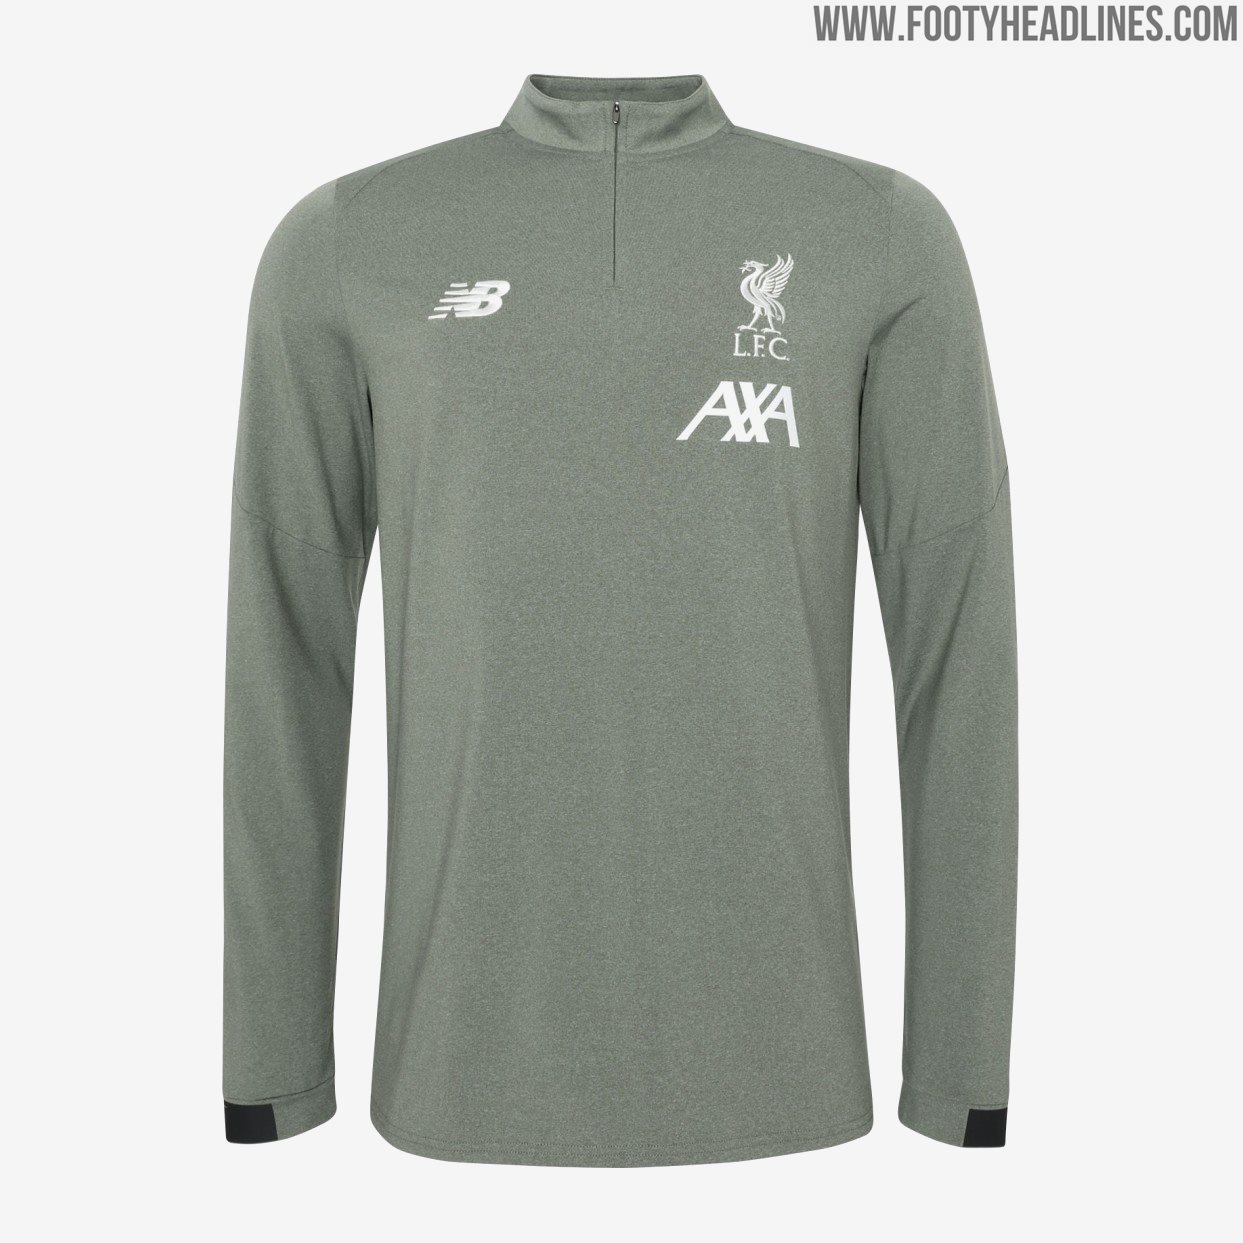 de sneeuw mengen orkest Last-Ever LFC Products By New Balance?! 2 Liverpool 2020 Training Kits +  Full Collection Released - Footy Headlines